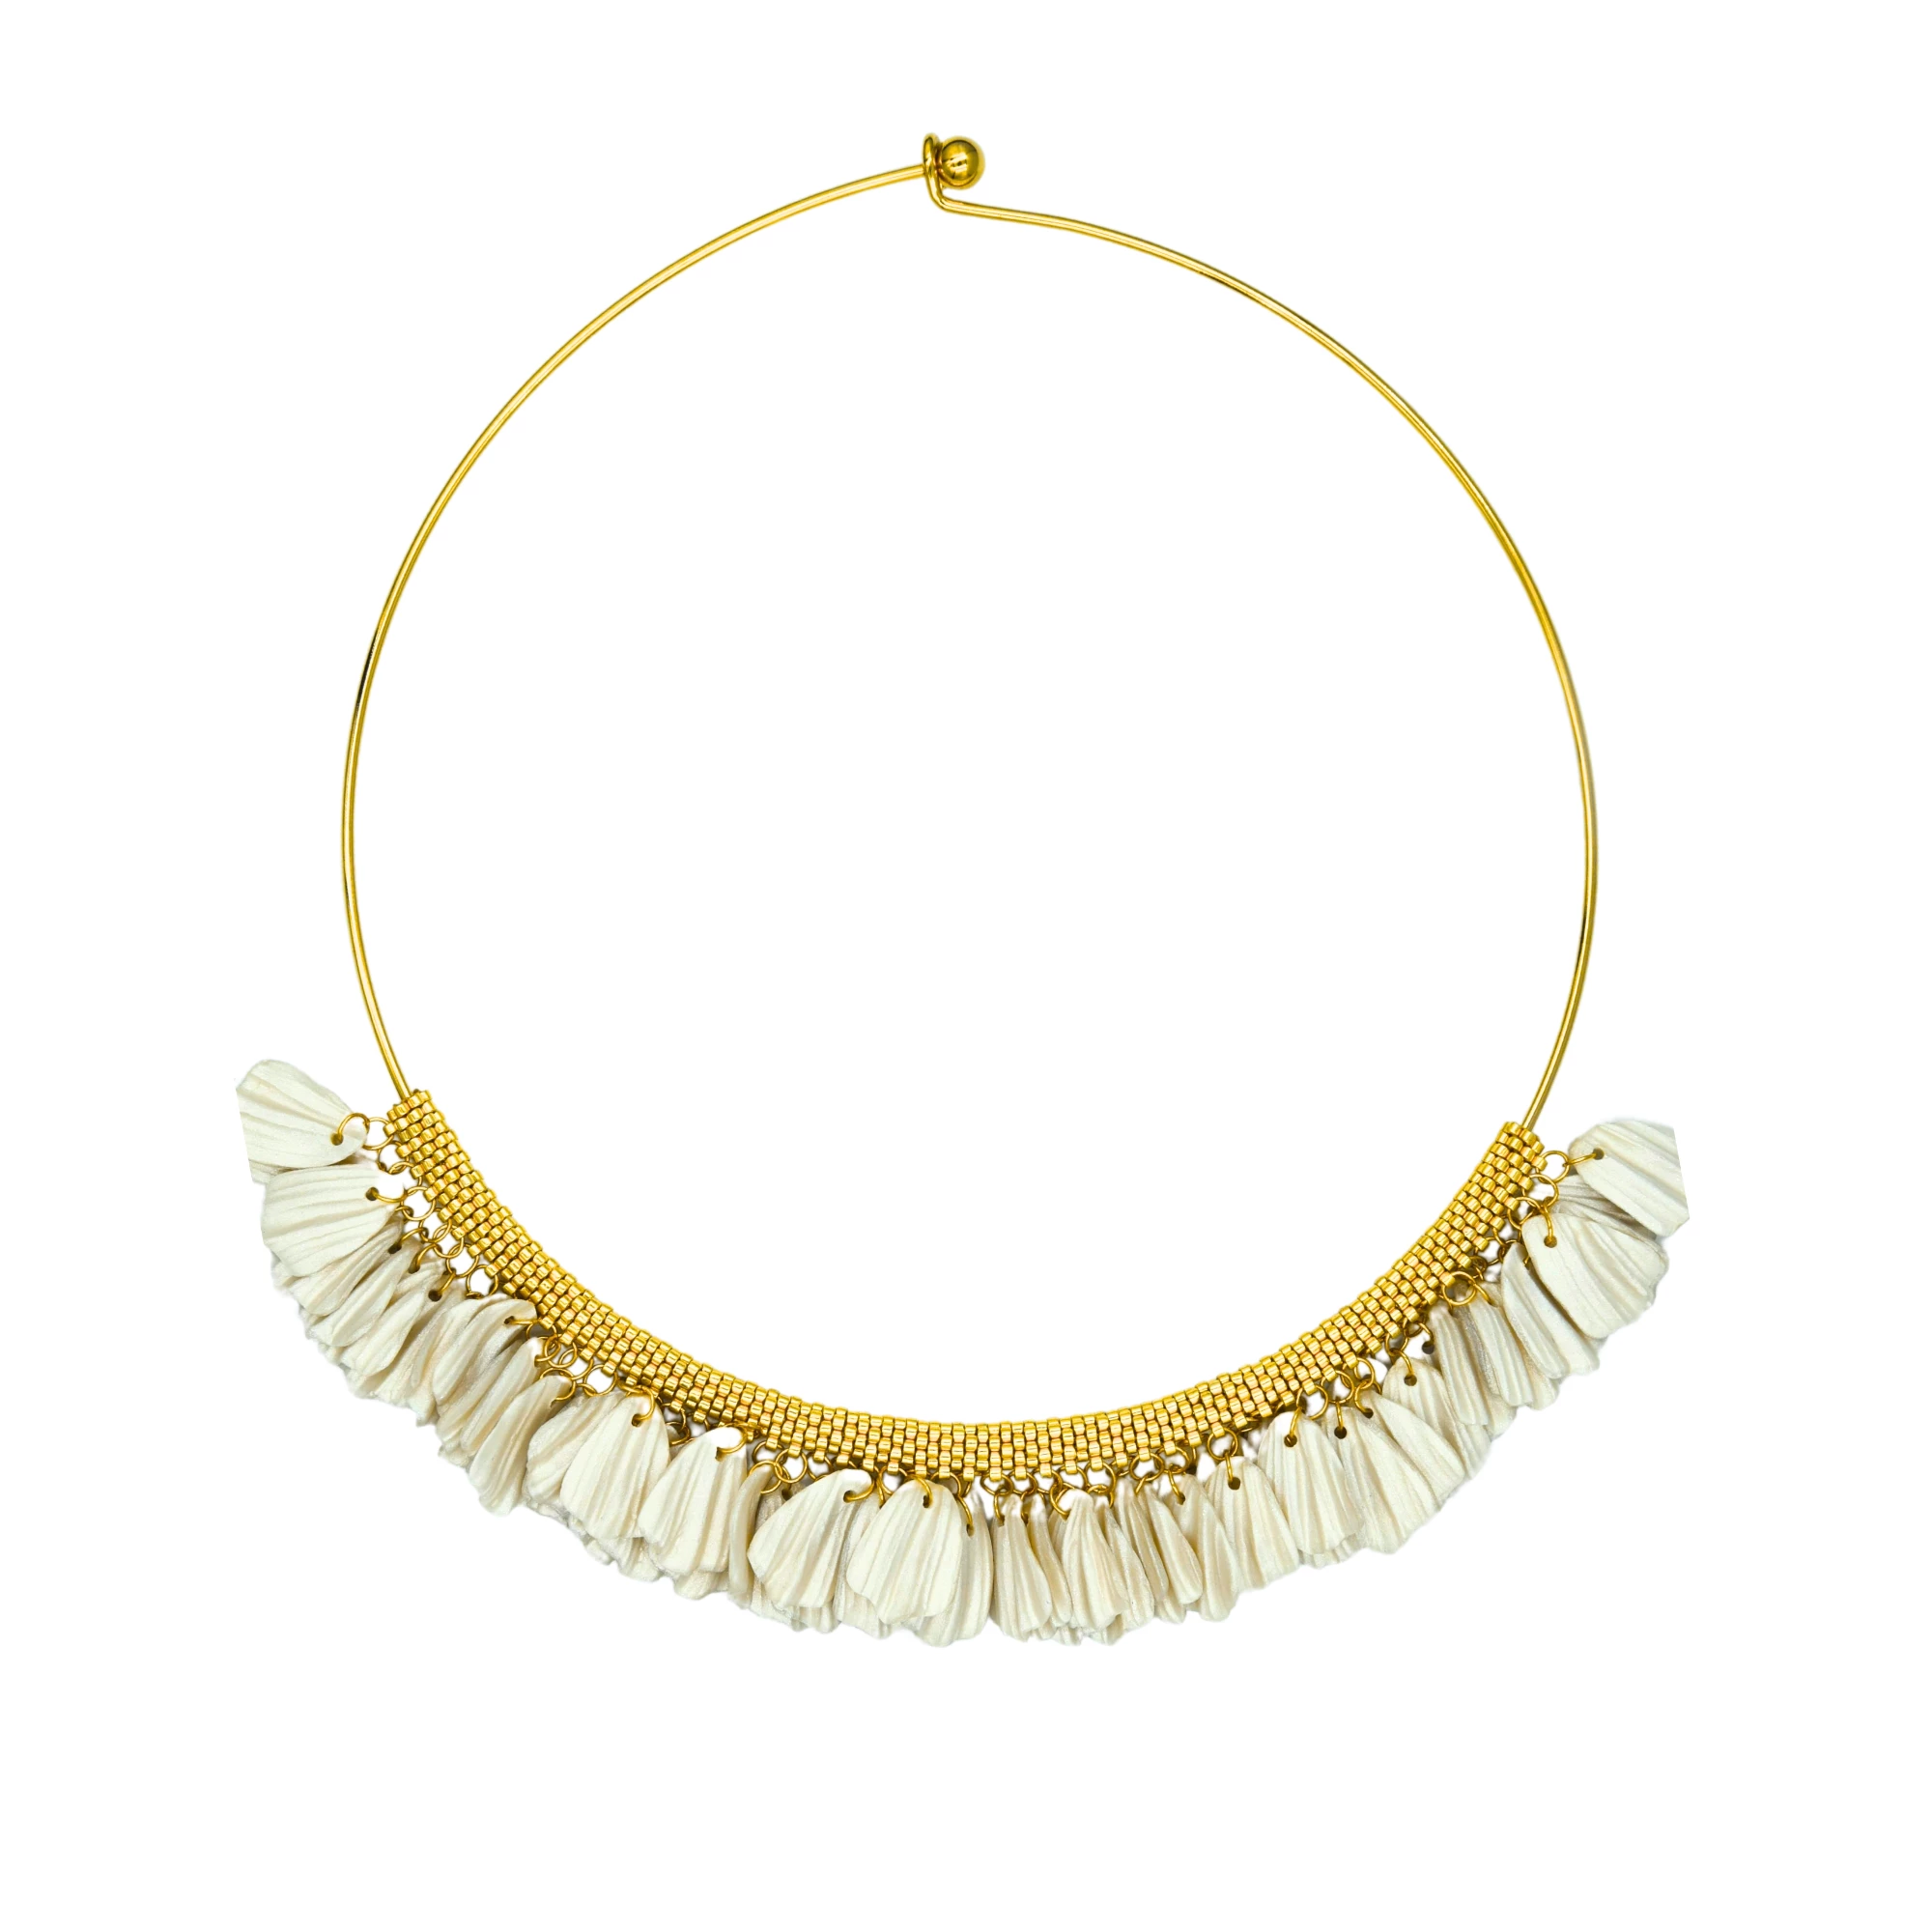 Gold Collar Necklace With White Petals
